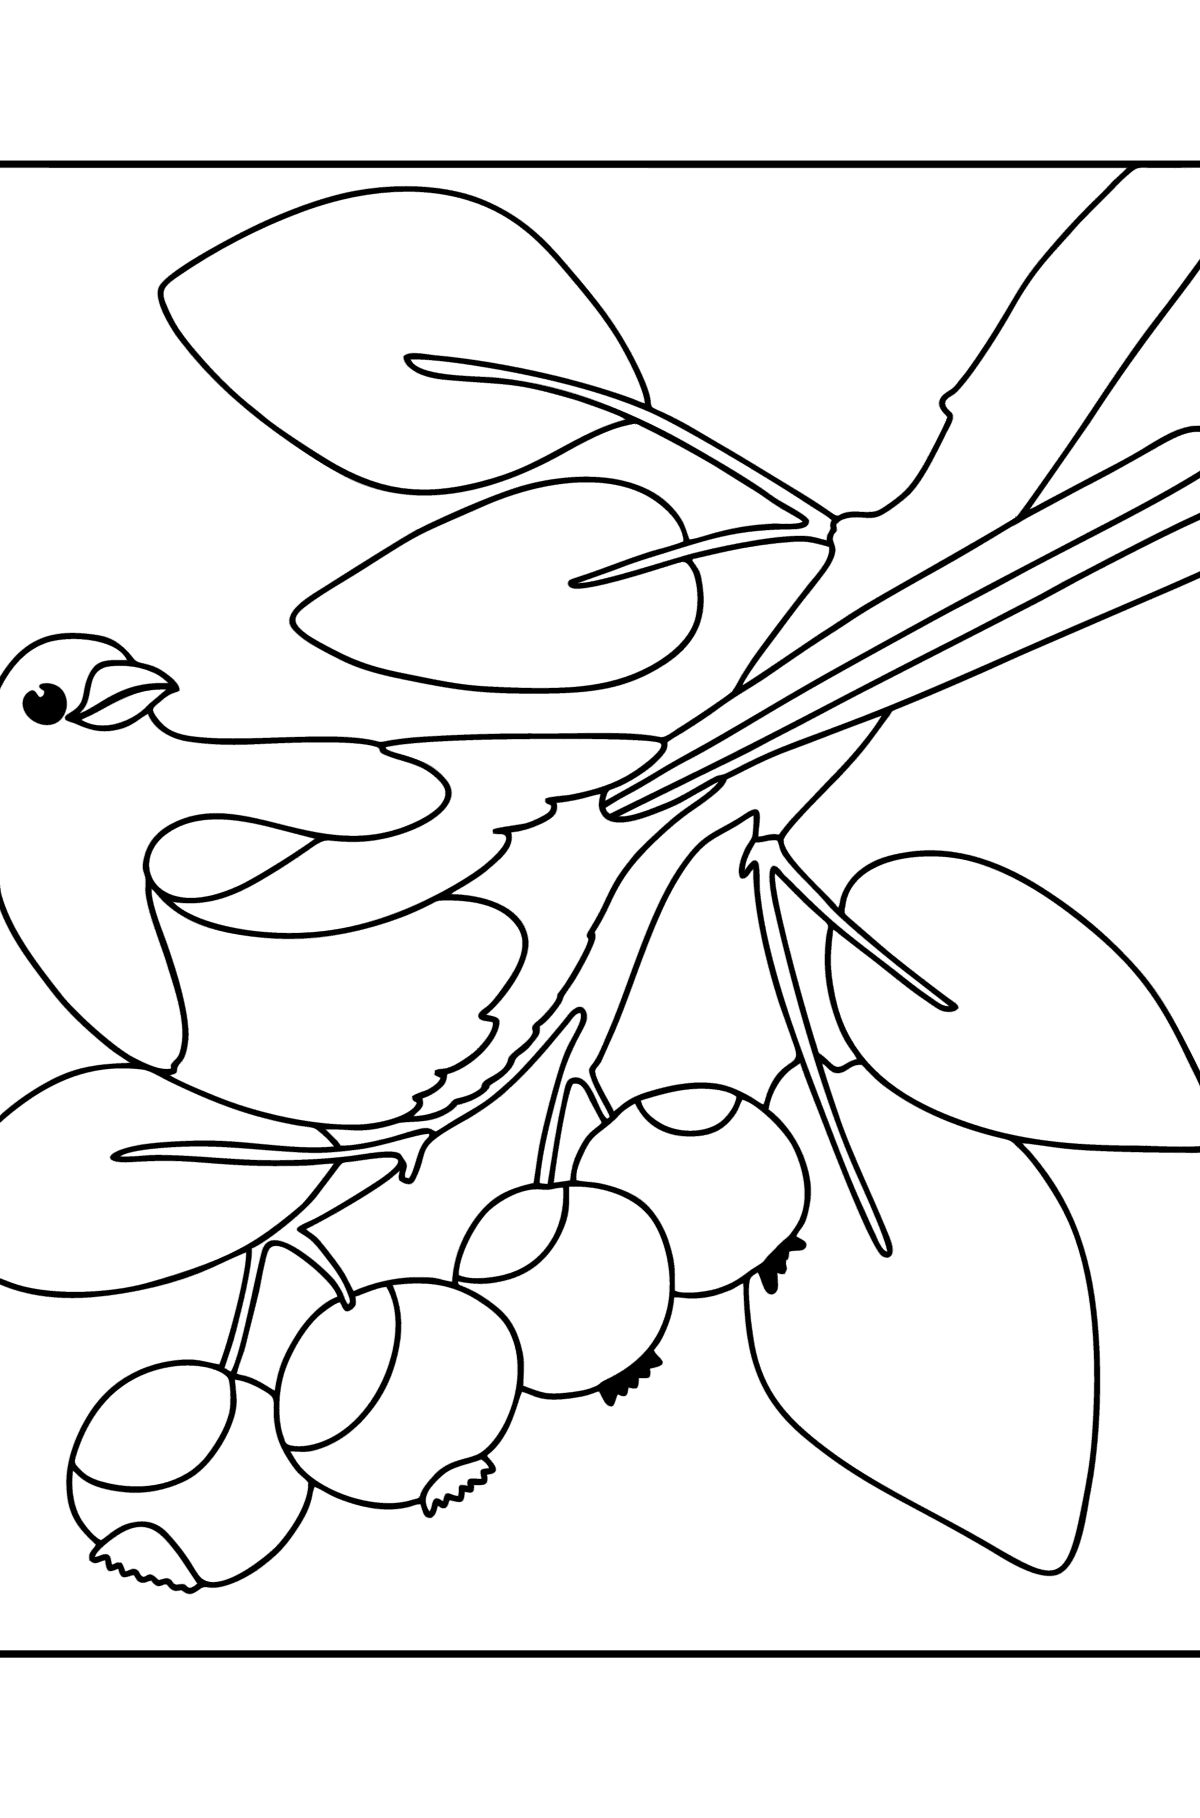 Magpie on a tree - Birds Coloring pages for Adults Online and Print